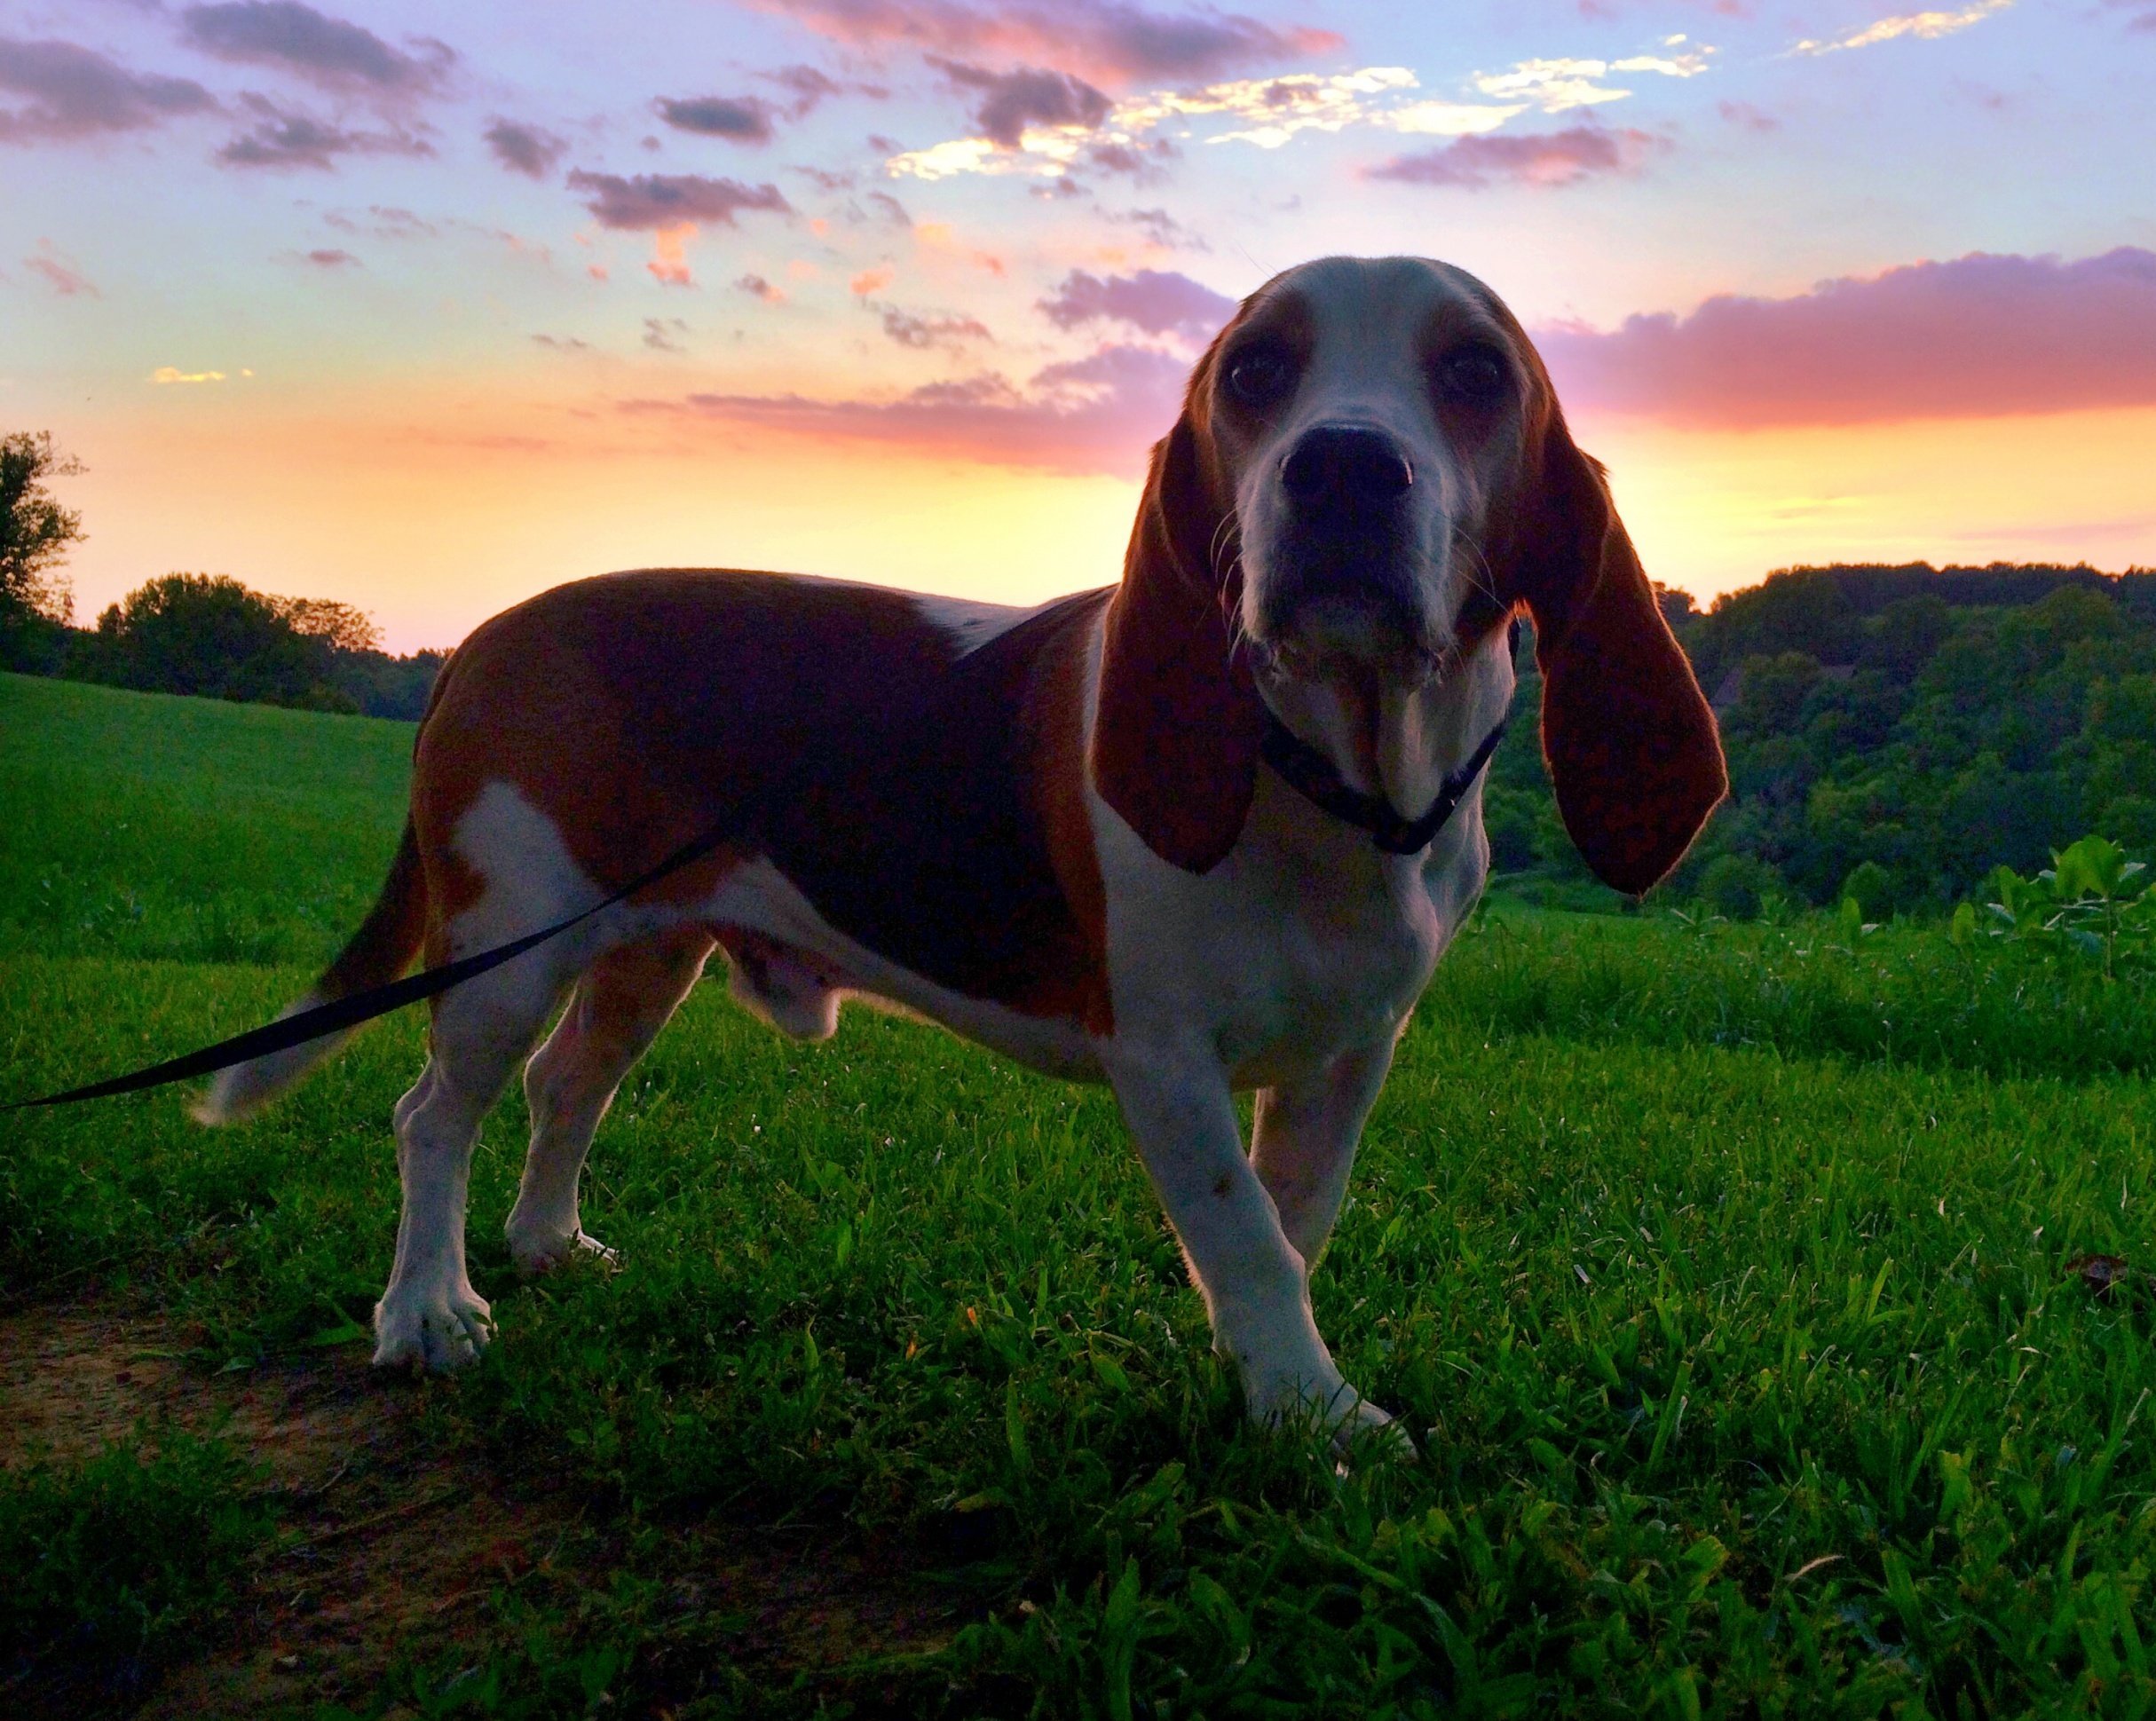 A dog with long floppy ears looks at the camera while standing in front of a sunset.